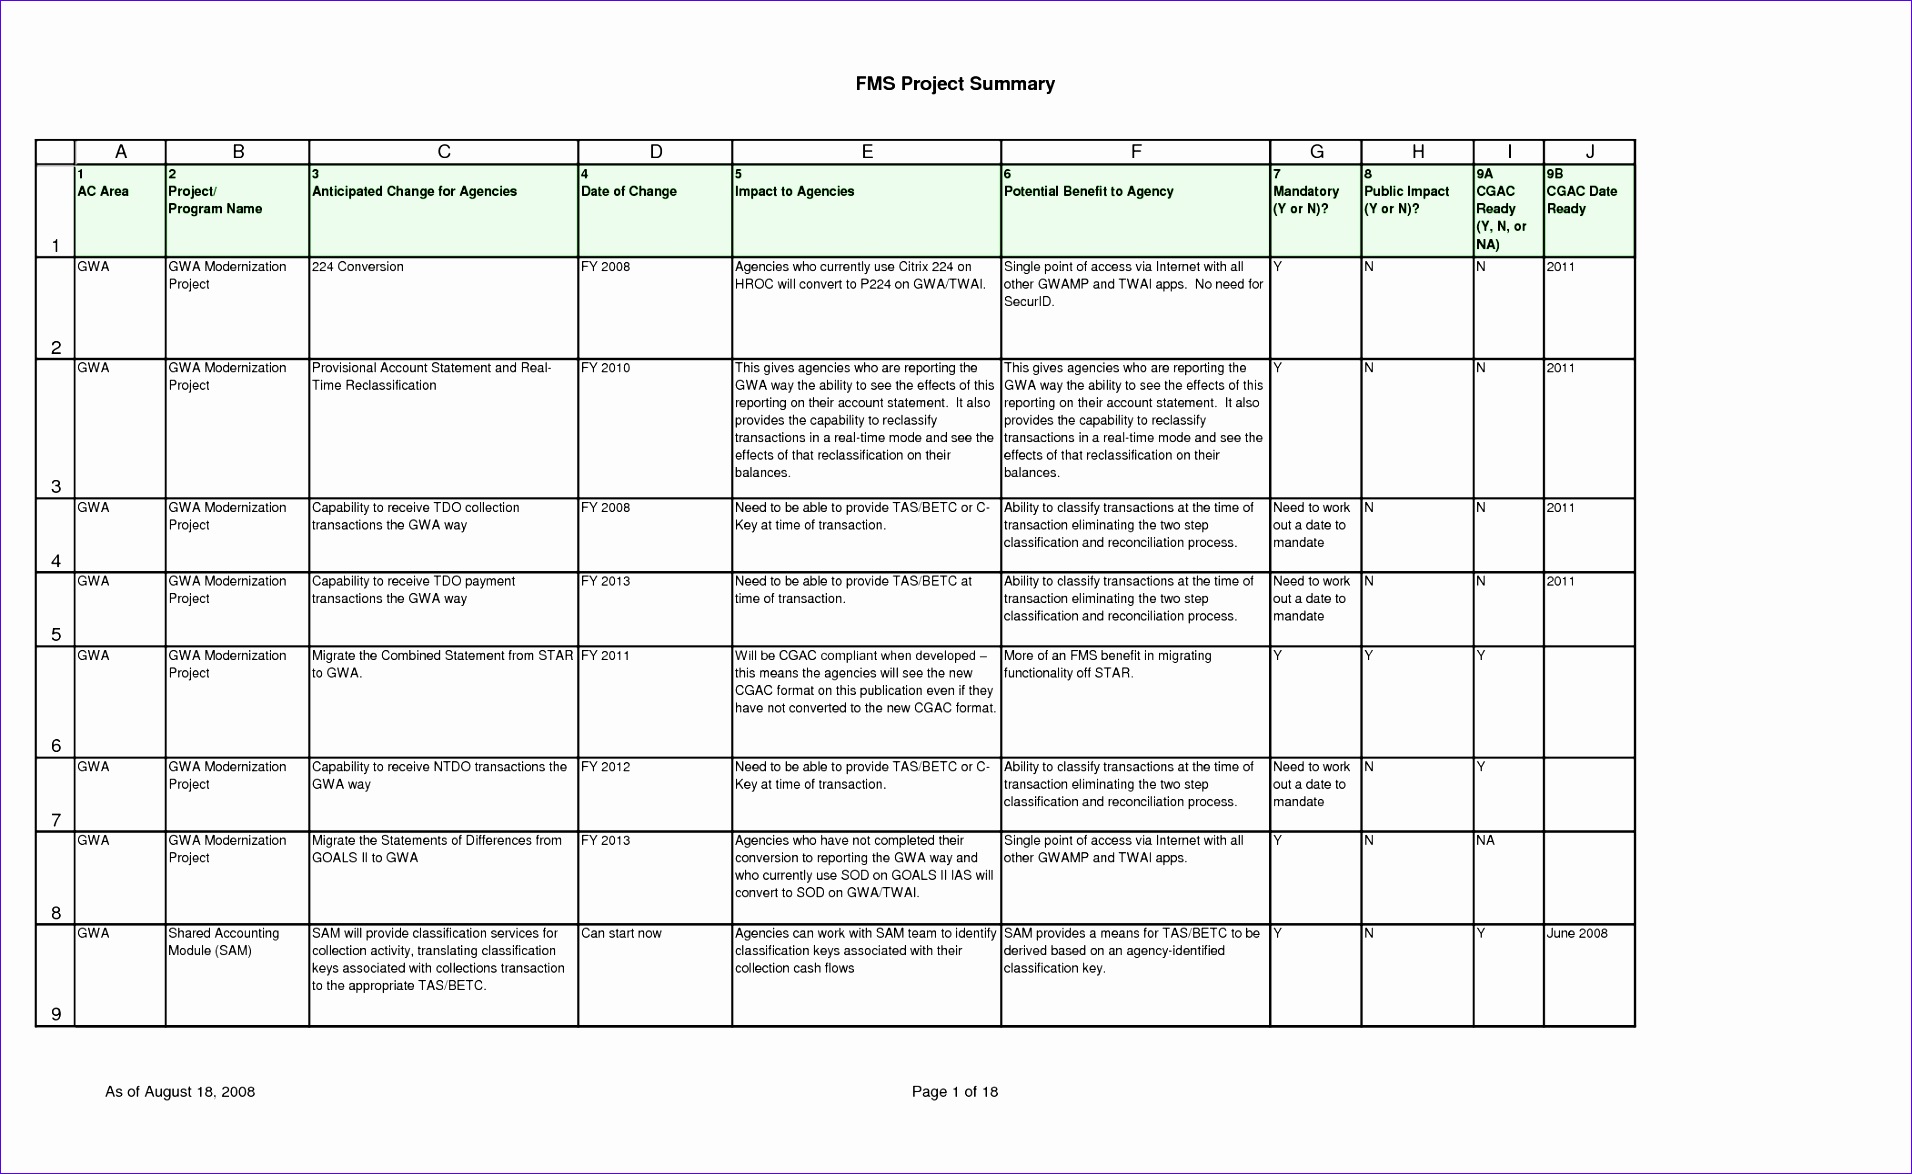 project plan template excel